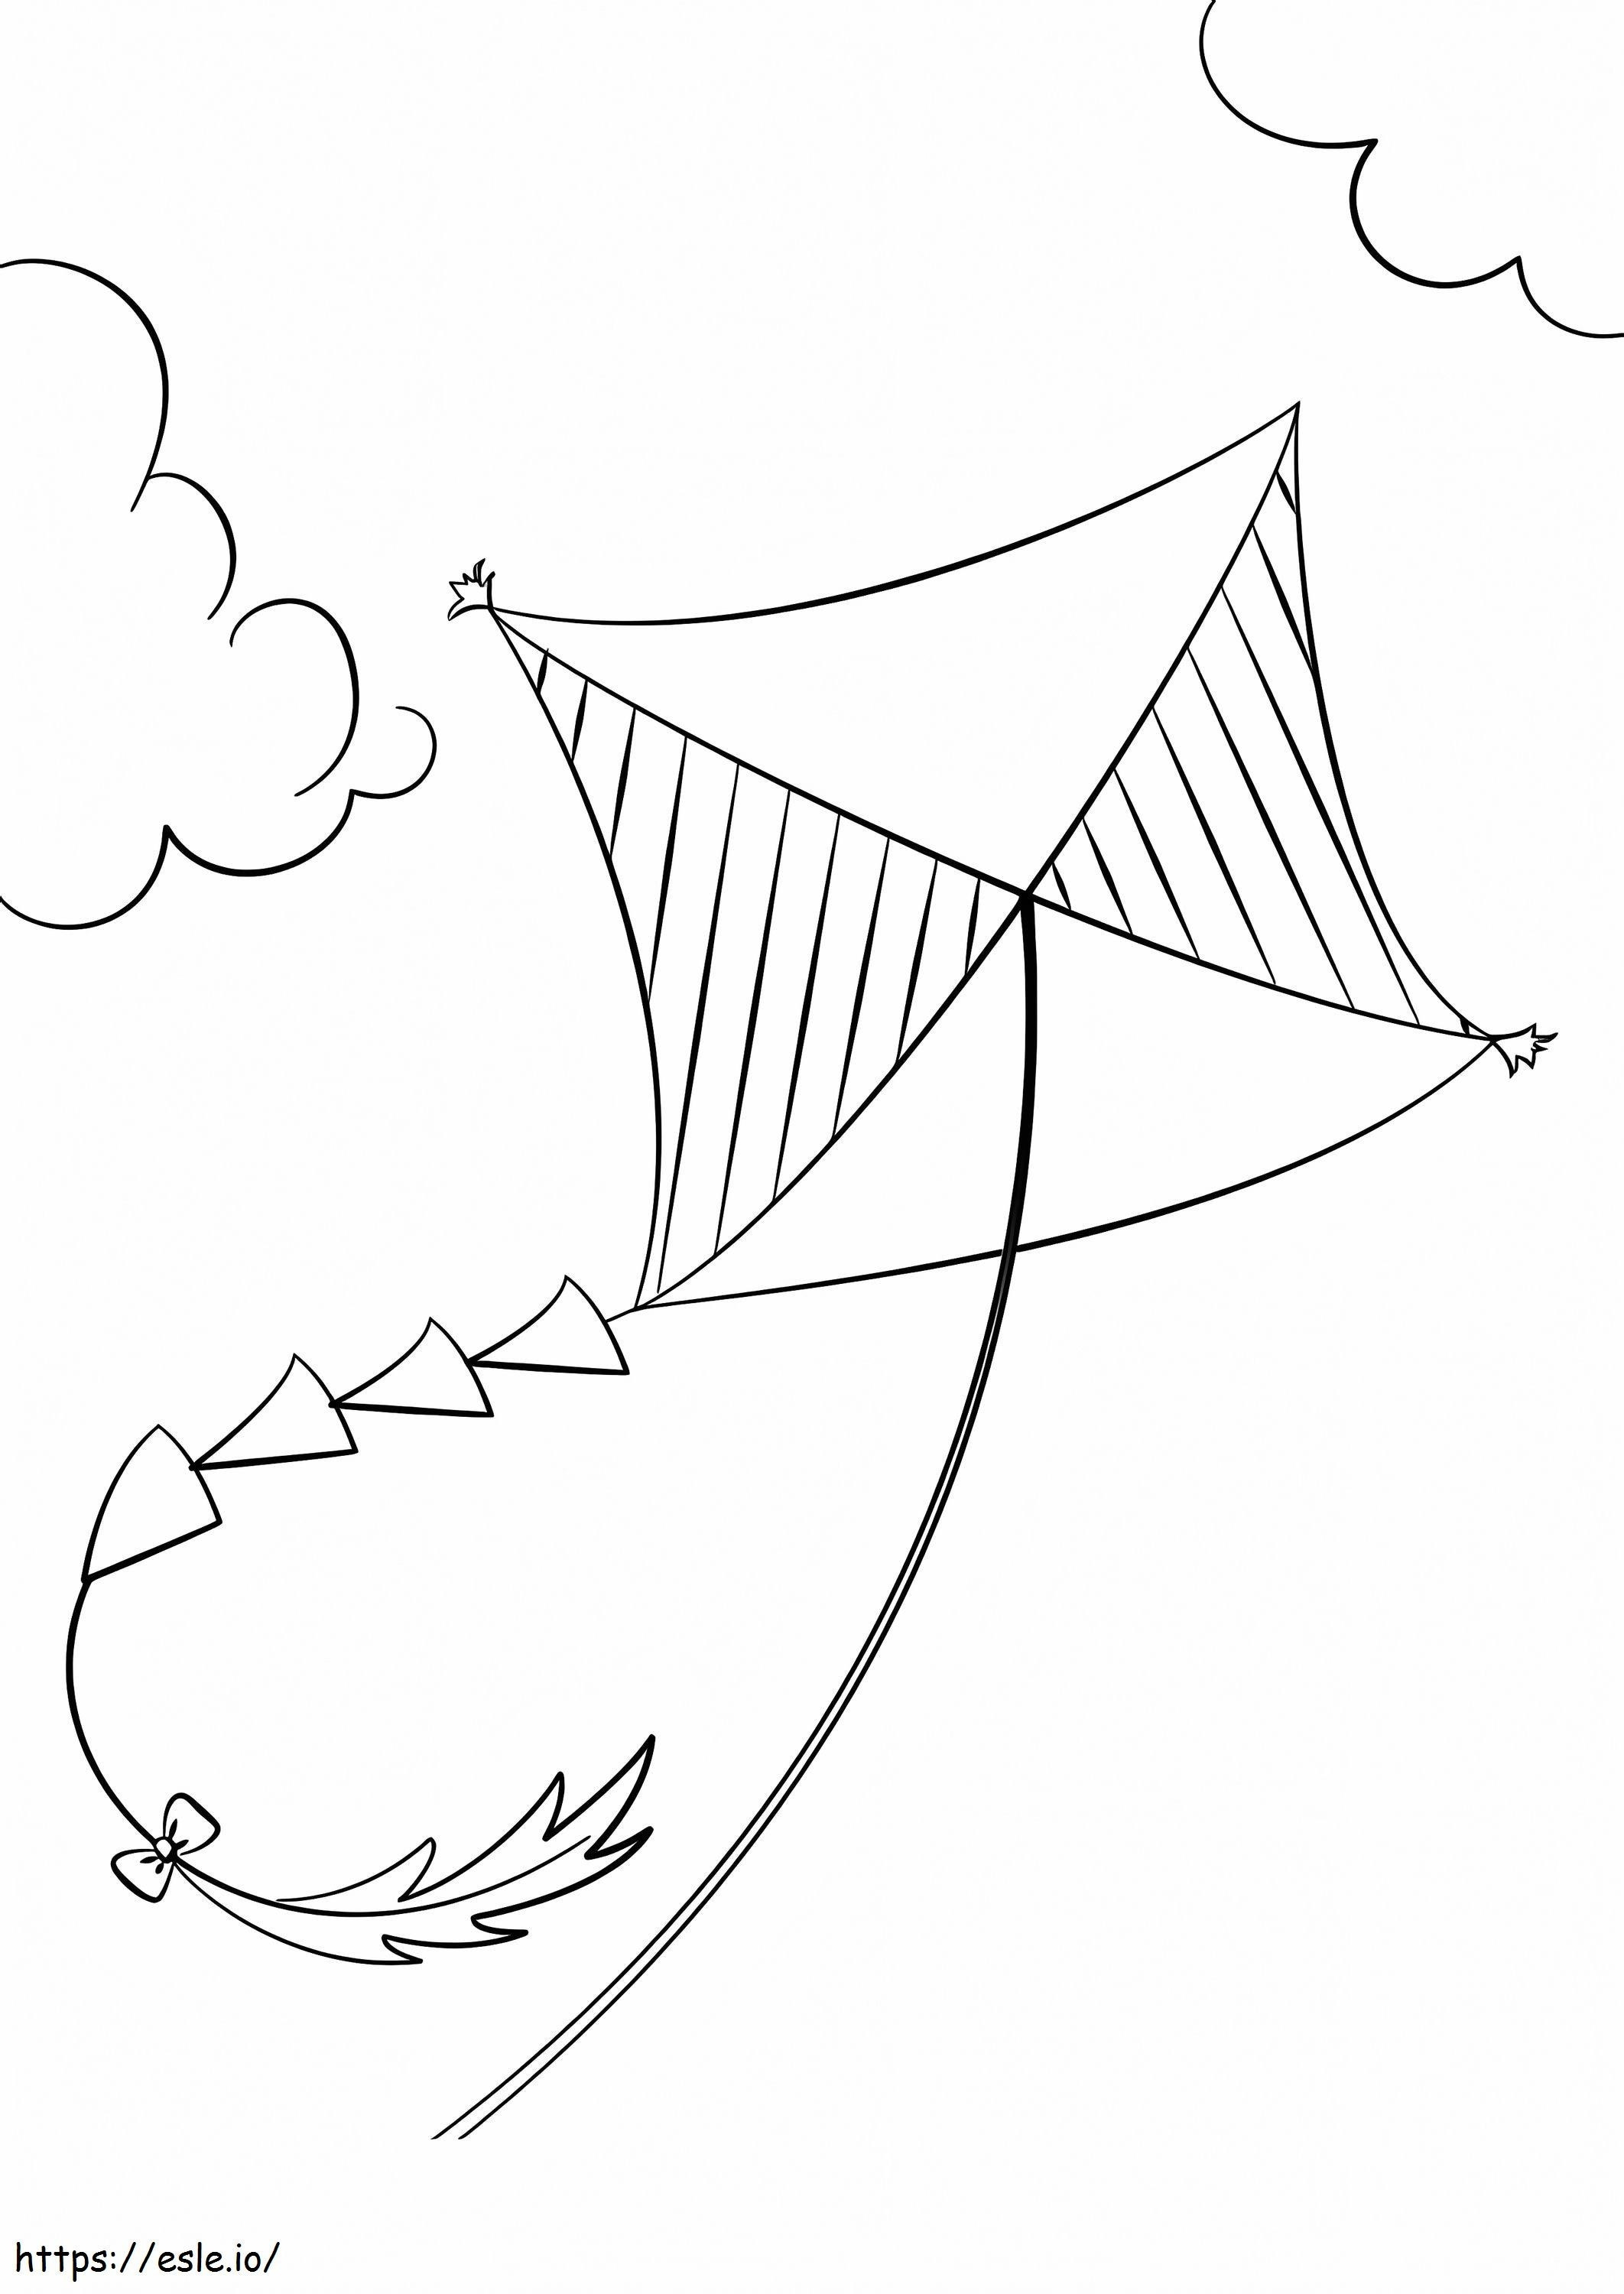 Kite 10 coloring page